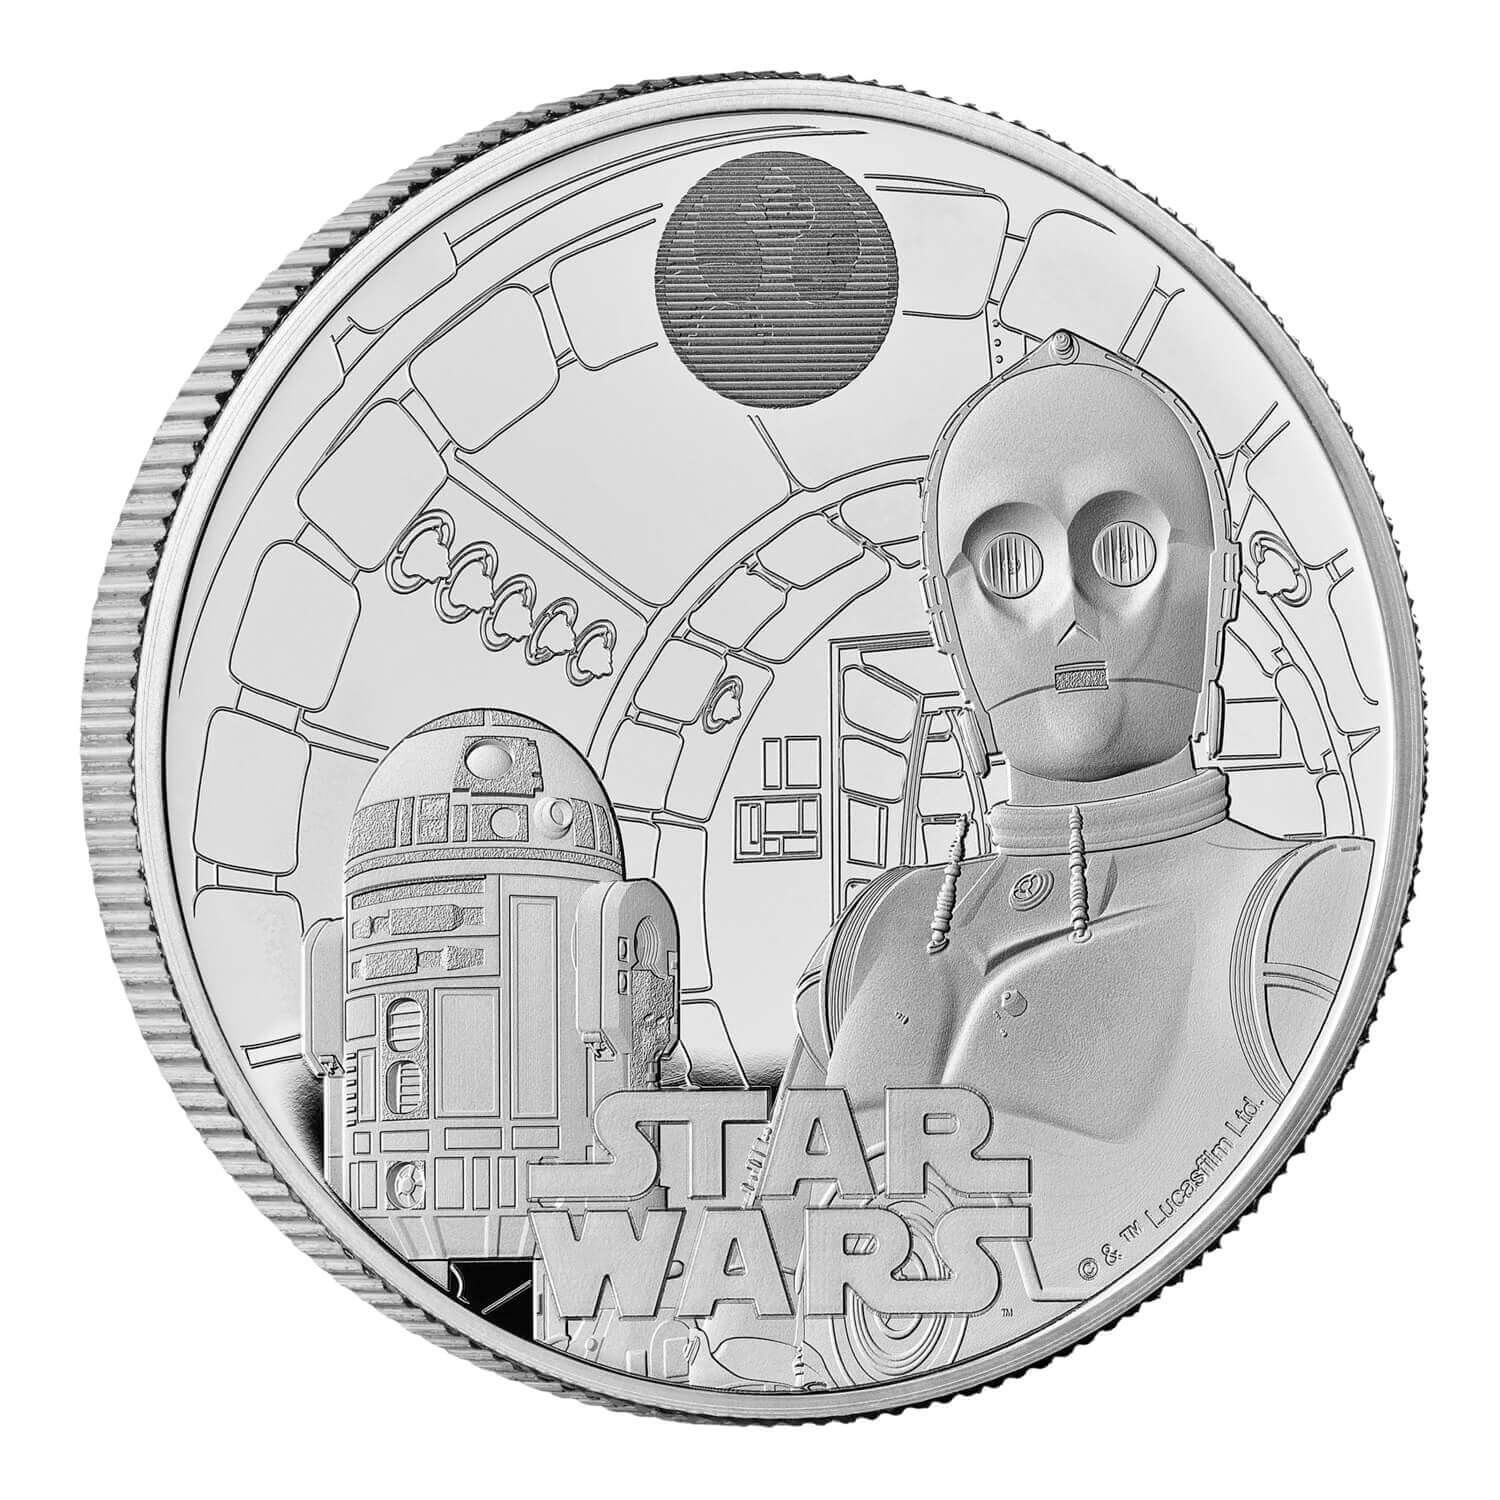 (W185.2.P.2023.UK23R2SP) 2 Pounds United Kingdom 2023 1 oz Proof silver - Star Wars (R2-D2 and C3PO) Reverse (zoom)